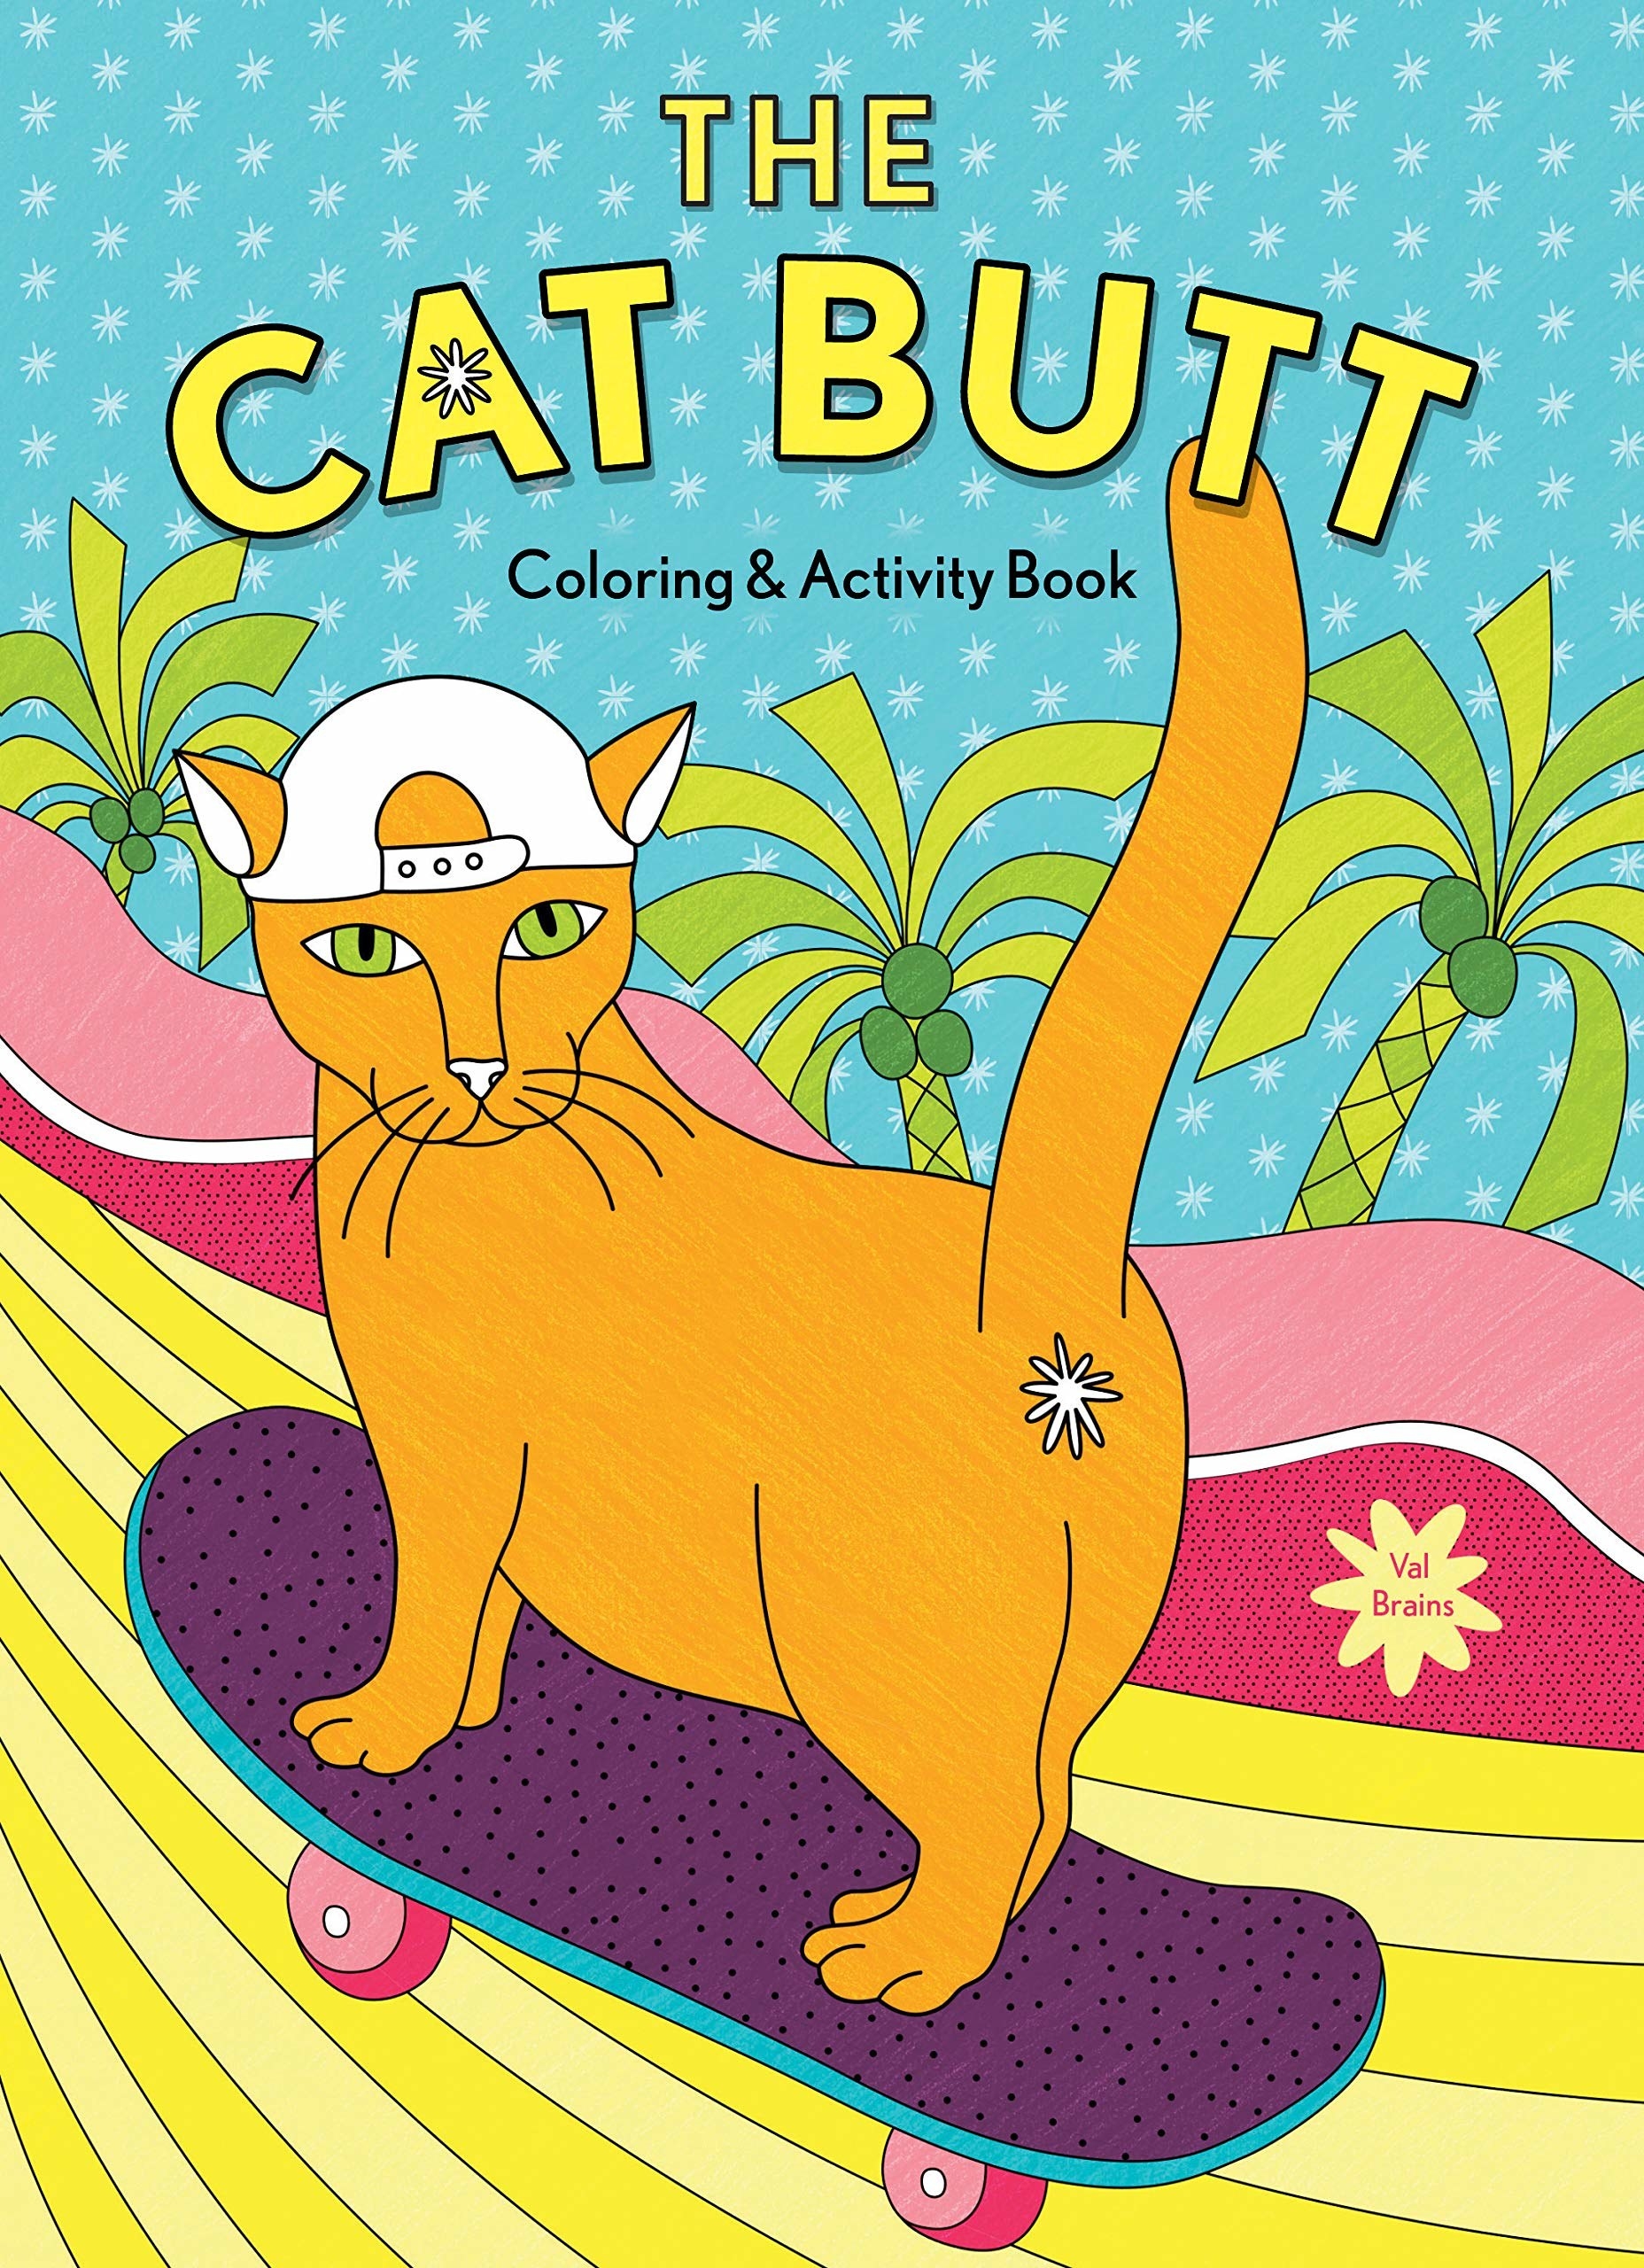 The front of the coloring book which shows a cat on a skateboard